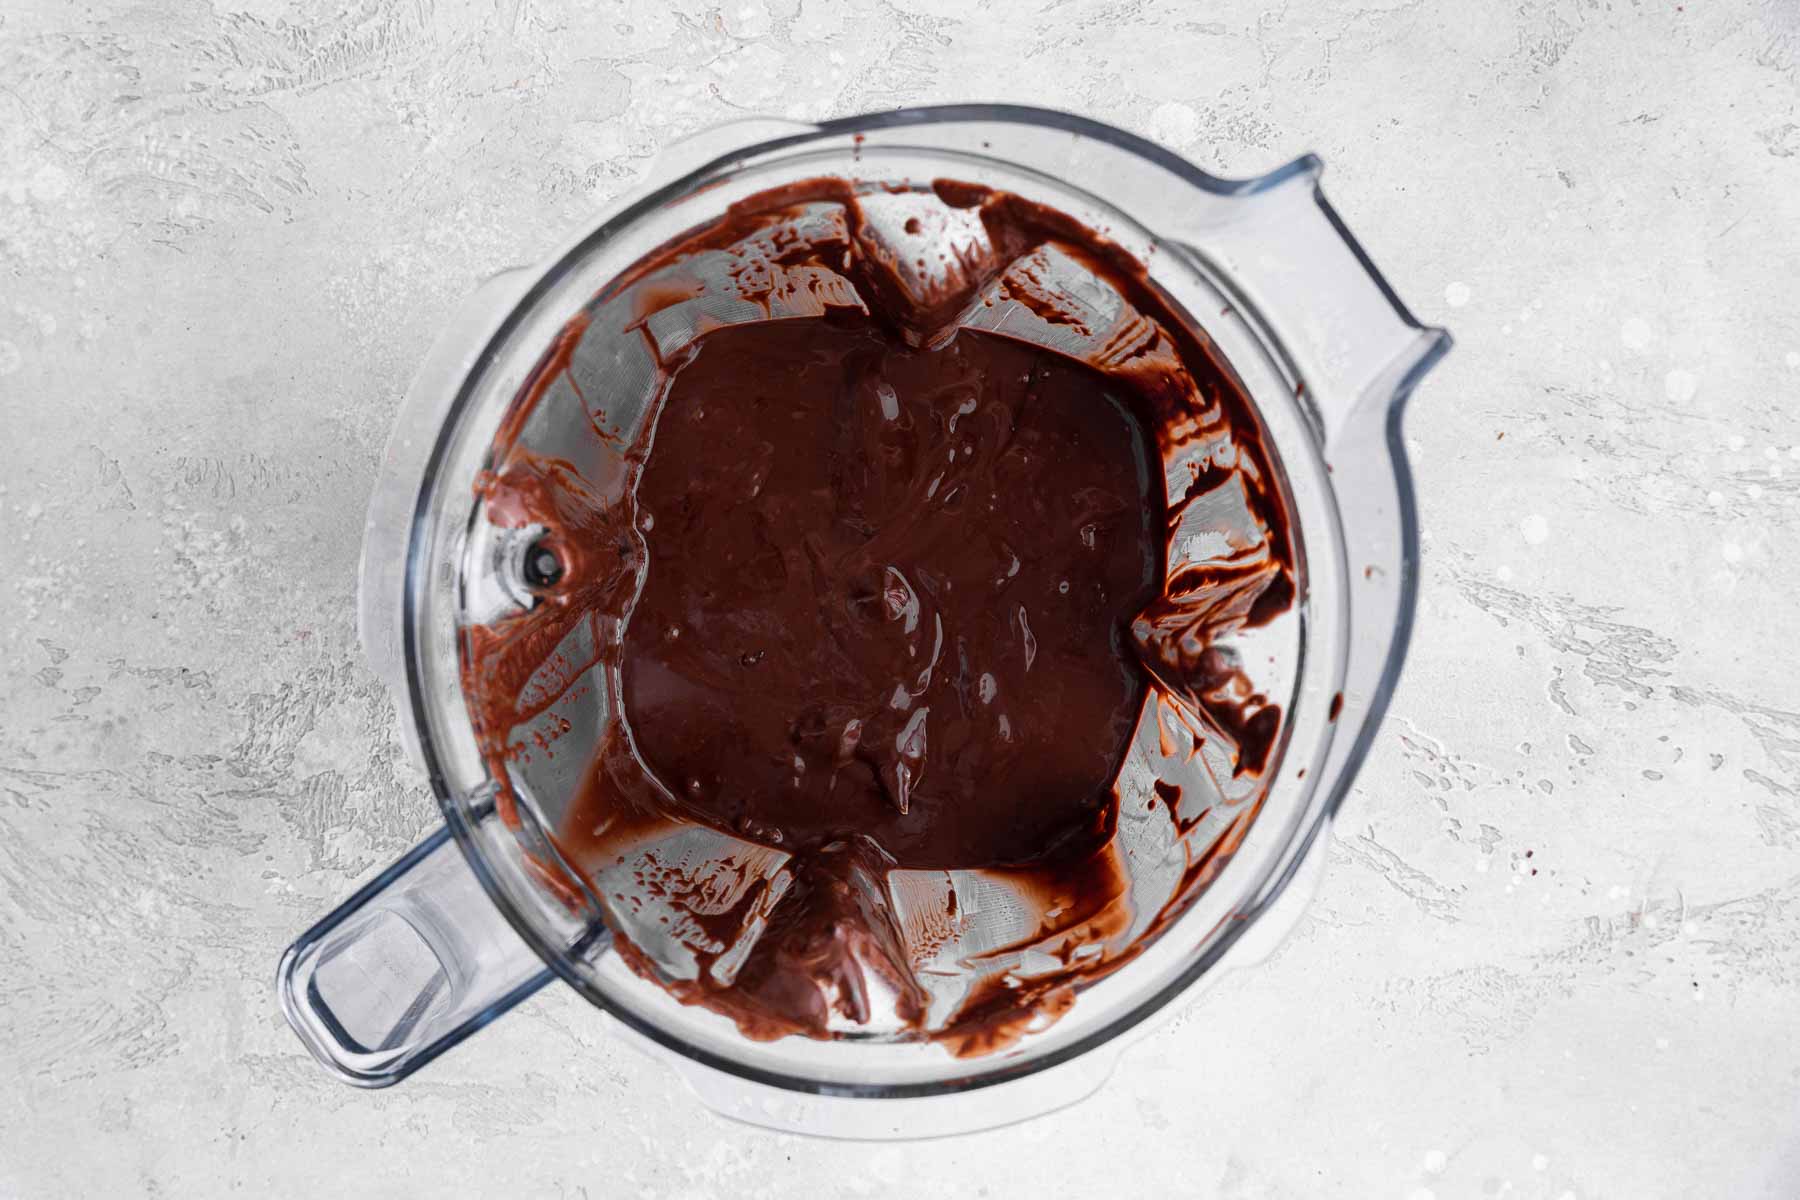 Shiny melted chocolate in a blender with the lid off.